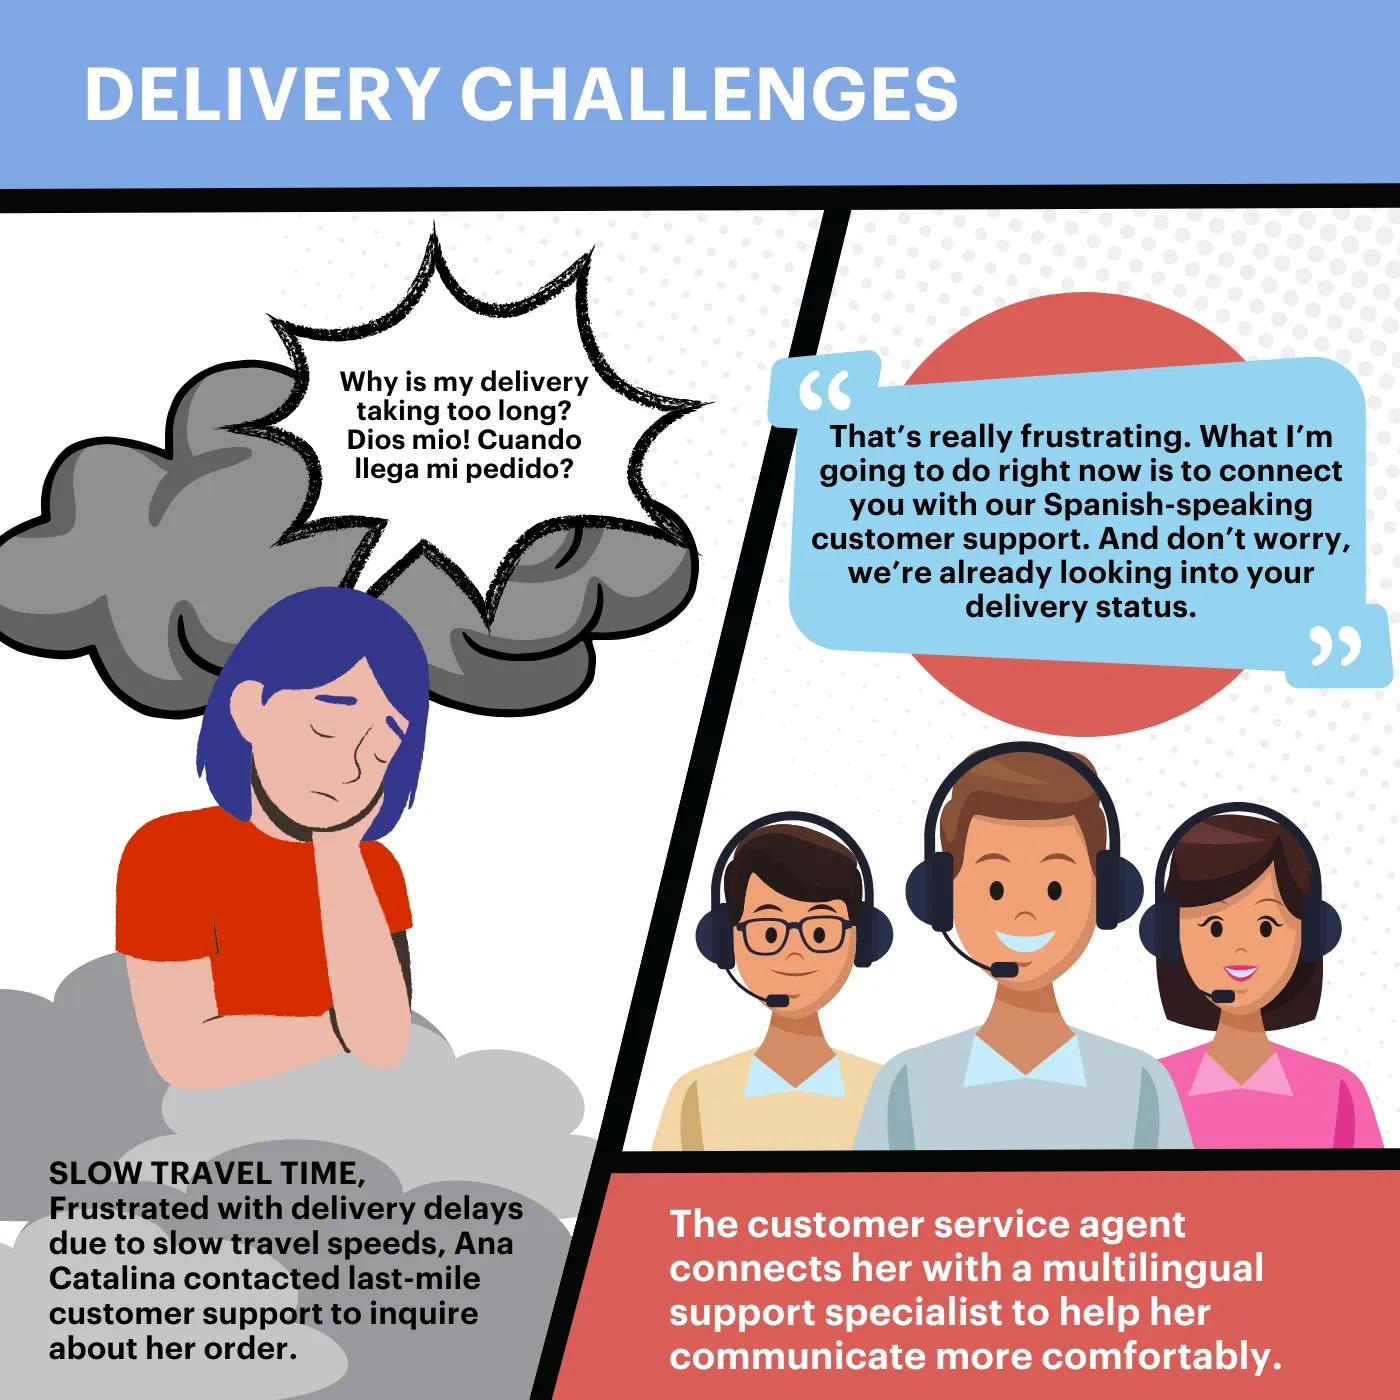 Image captions says: Delivery Challenges